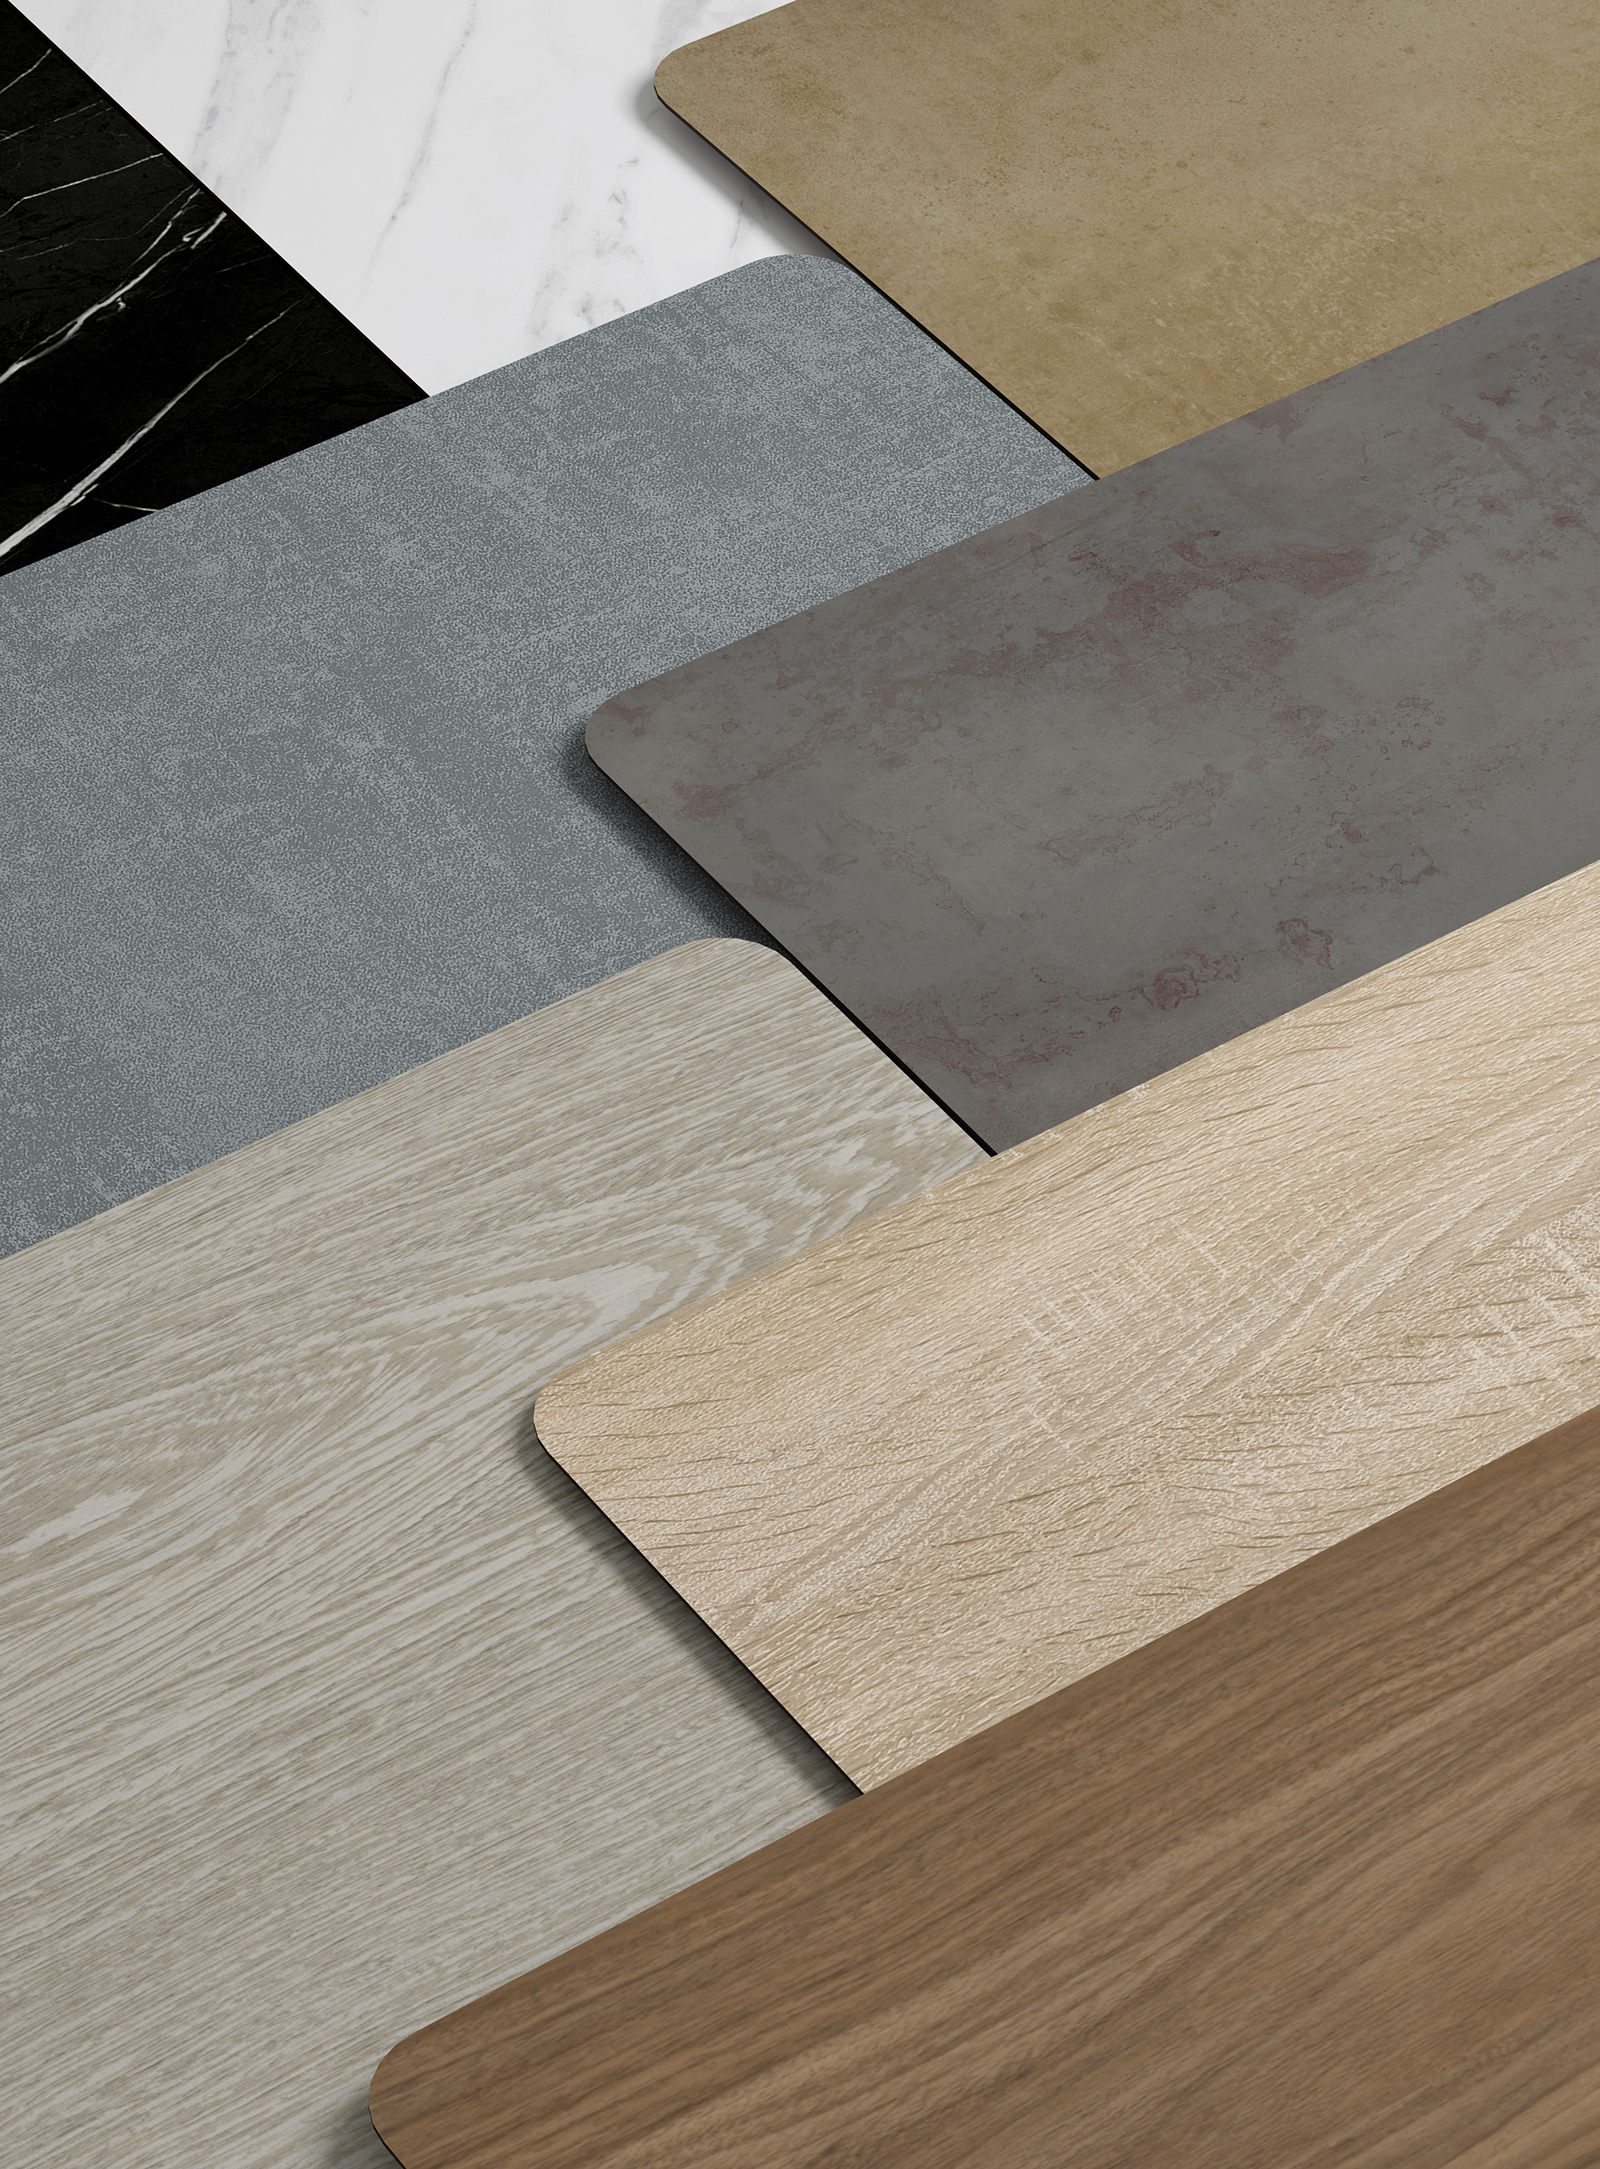 Samples of laminate board and HPL decors from the Mood Stories Comfort Collection